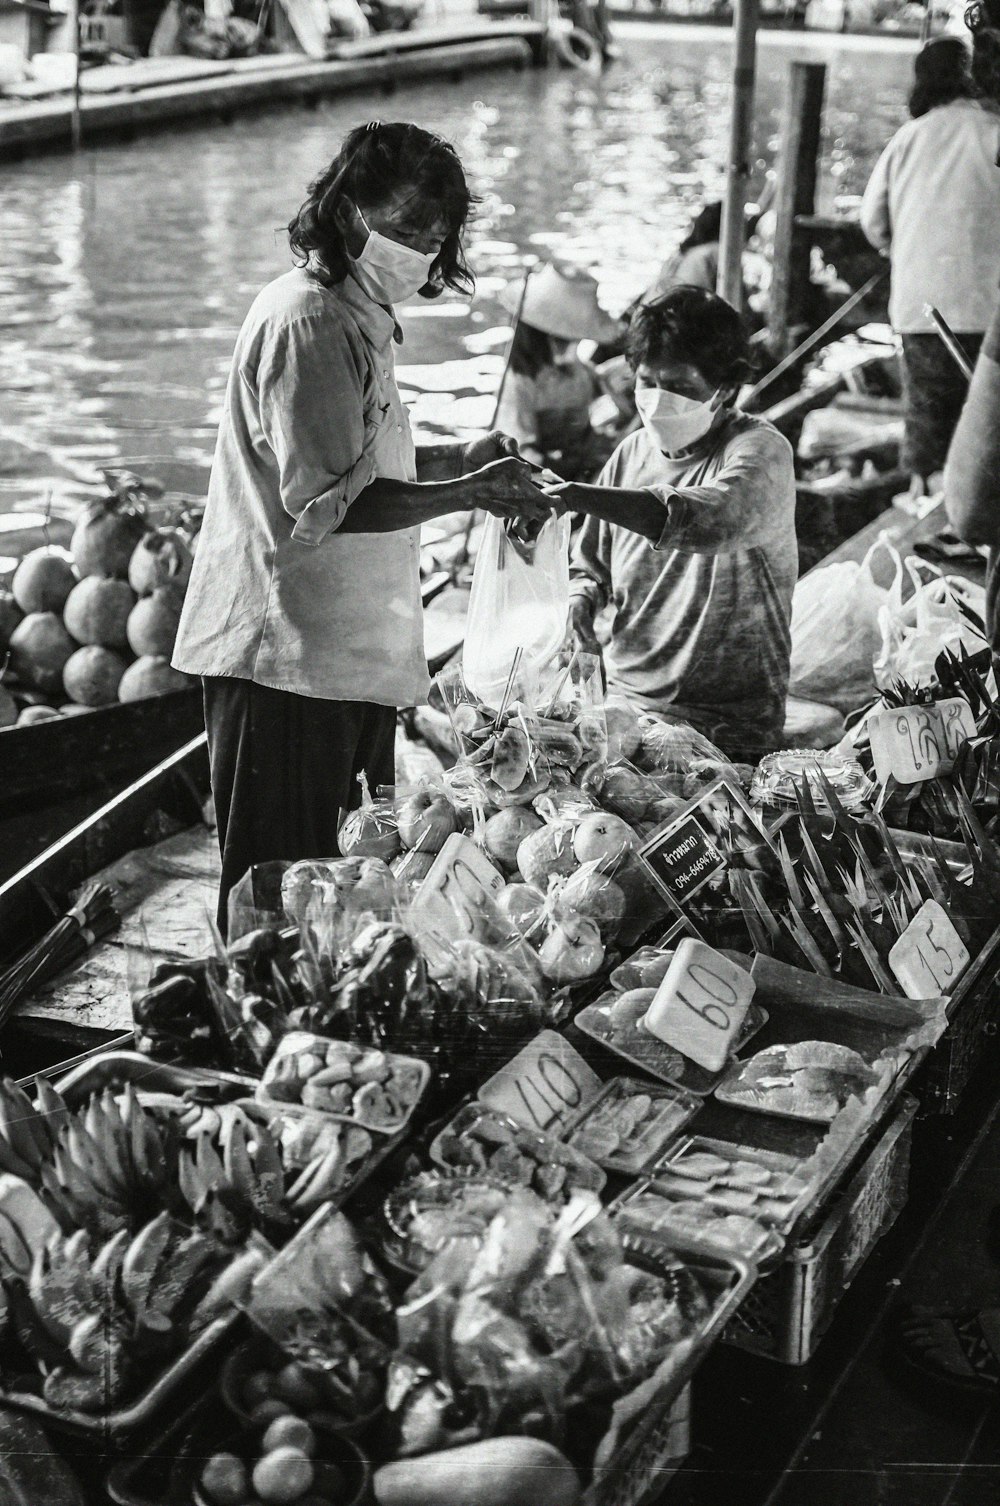 a black and white photo of people in a boat selling produce